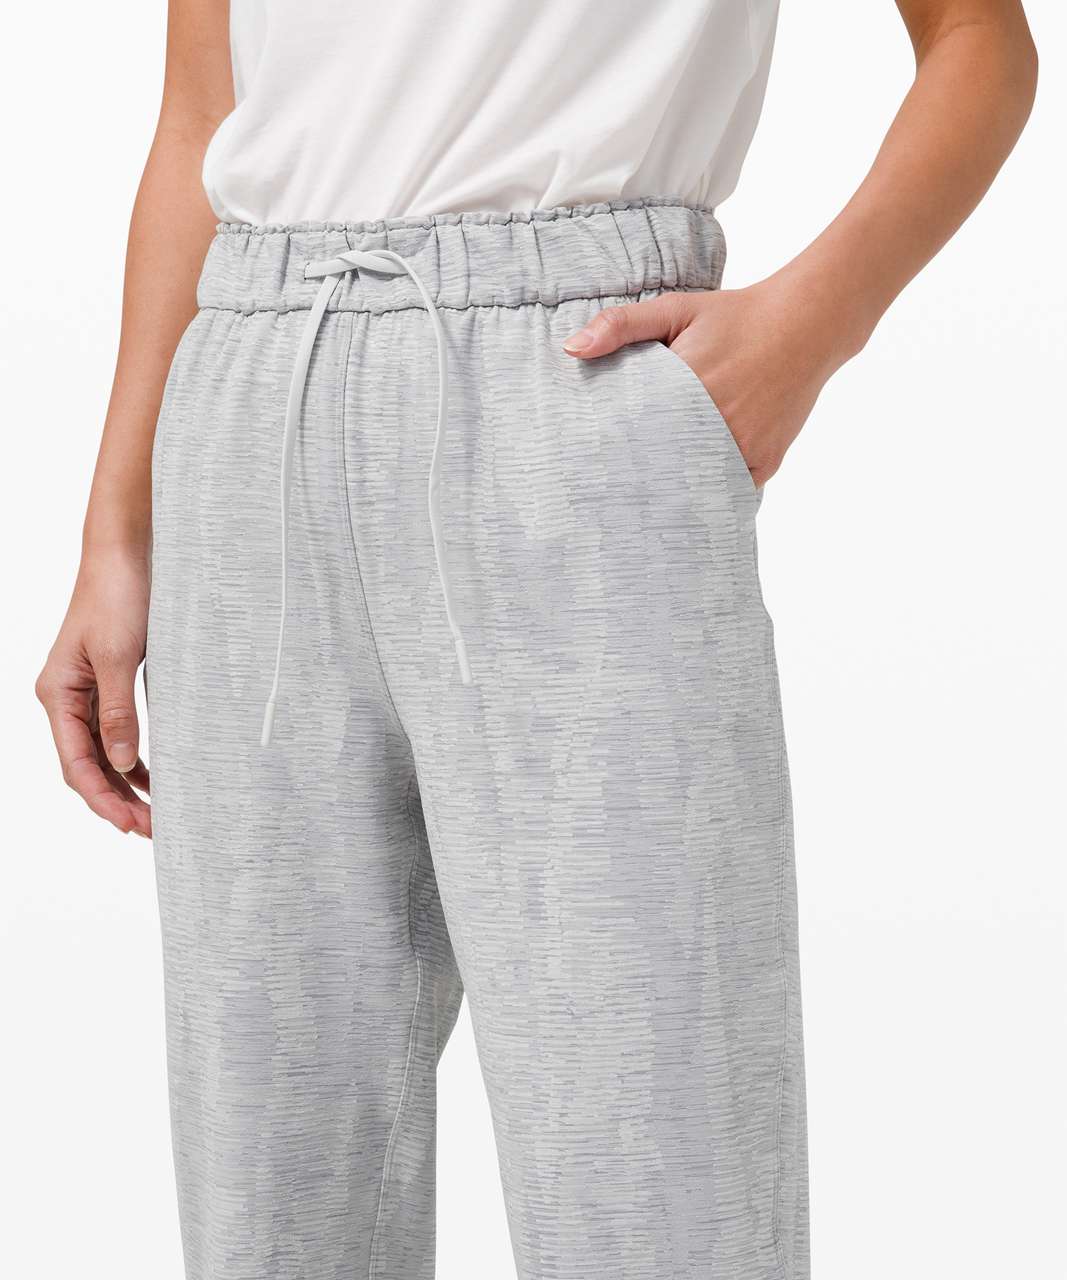 Lululemon Keep Moving Pant 7/8 High-Rise. Size 4 for Sale in Glendora, CA -  OfferUp